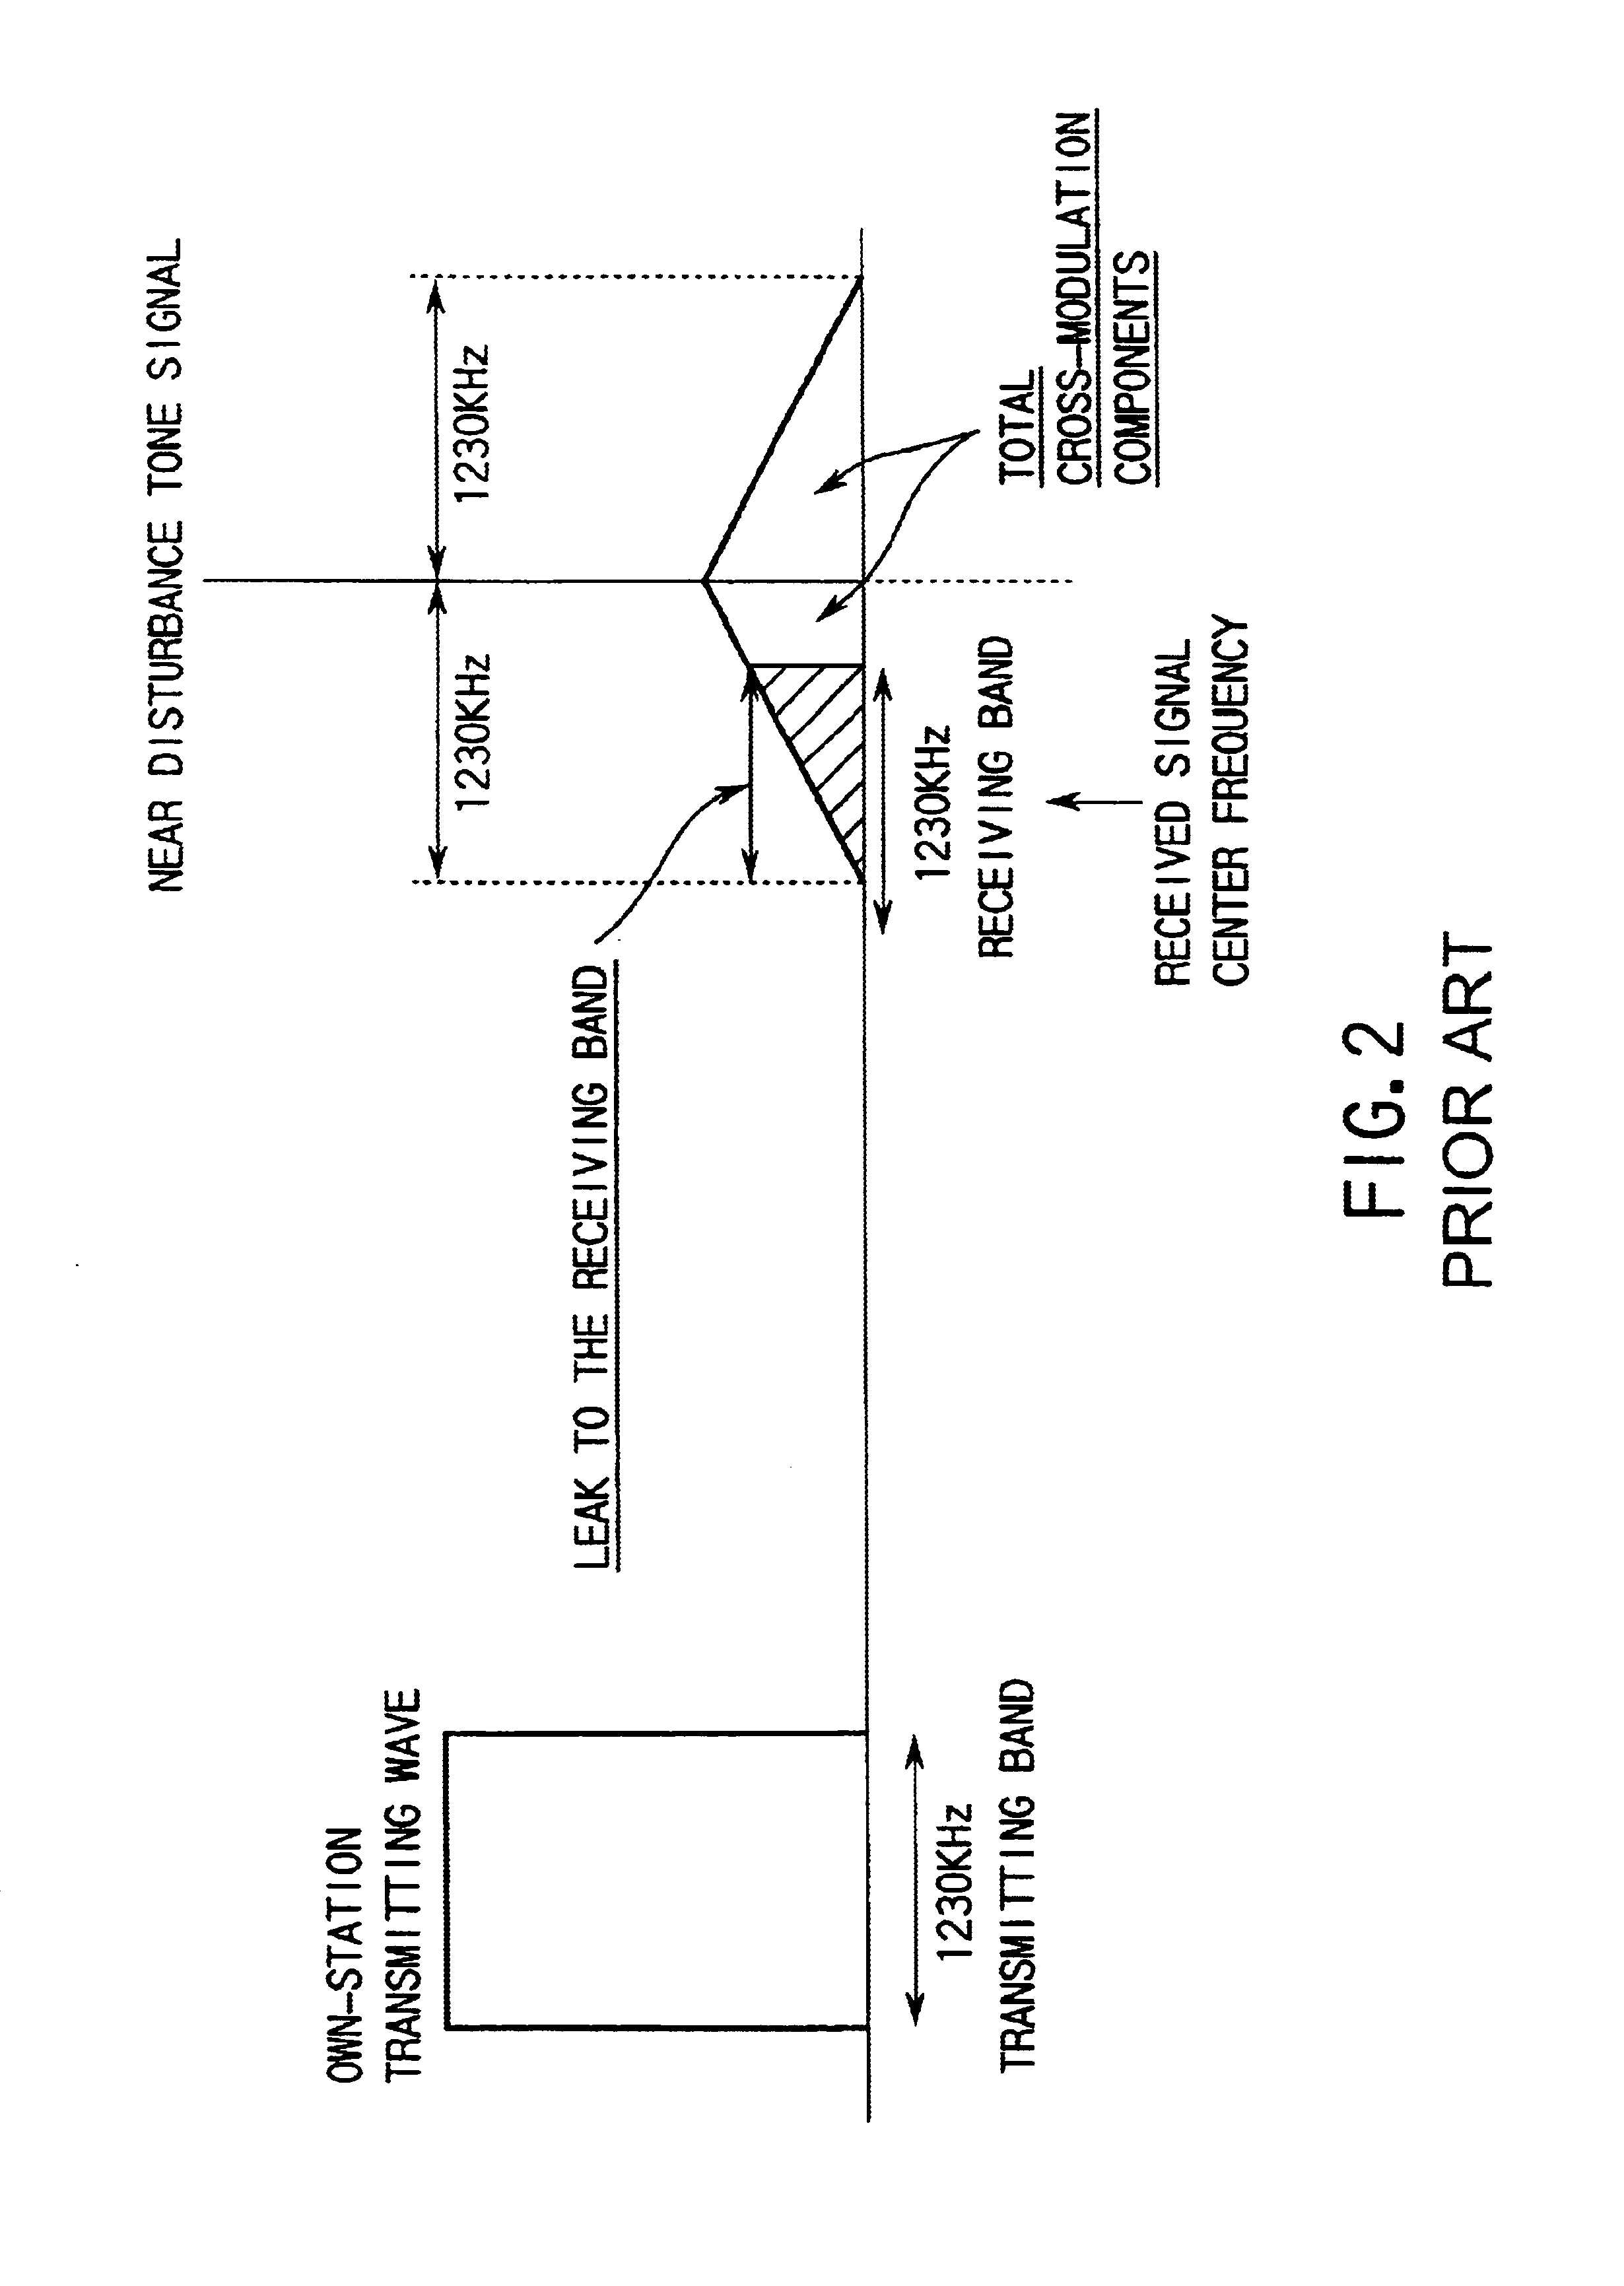 Radio transmitter-receiver, high-frequency radio receiver, and control unit